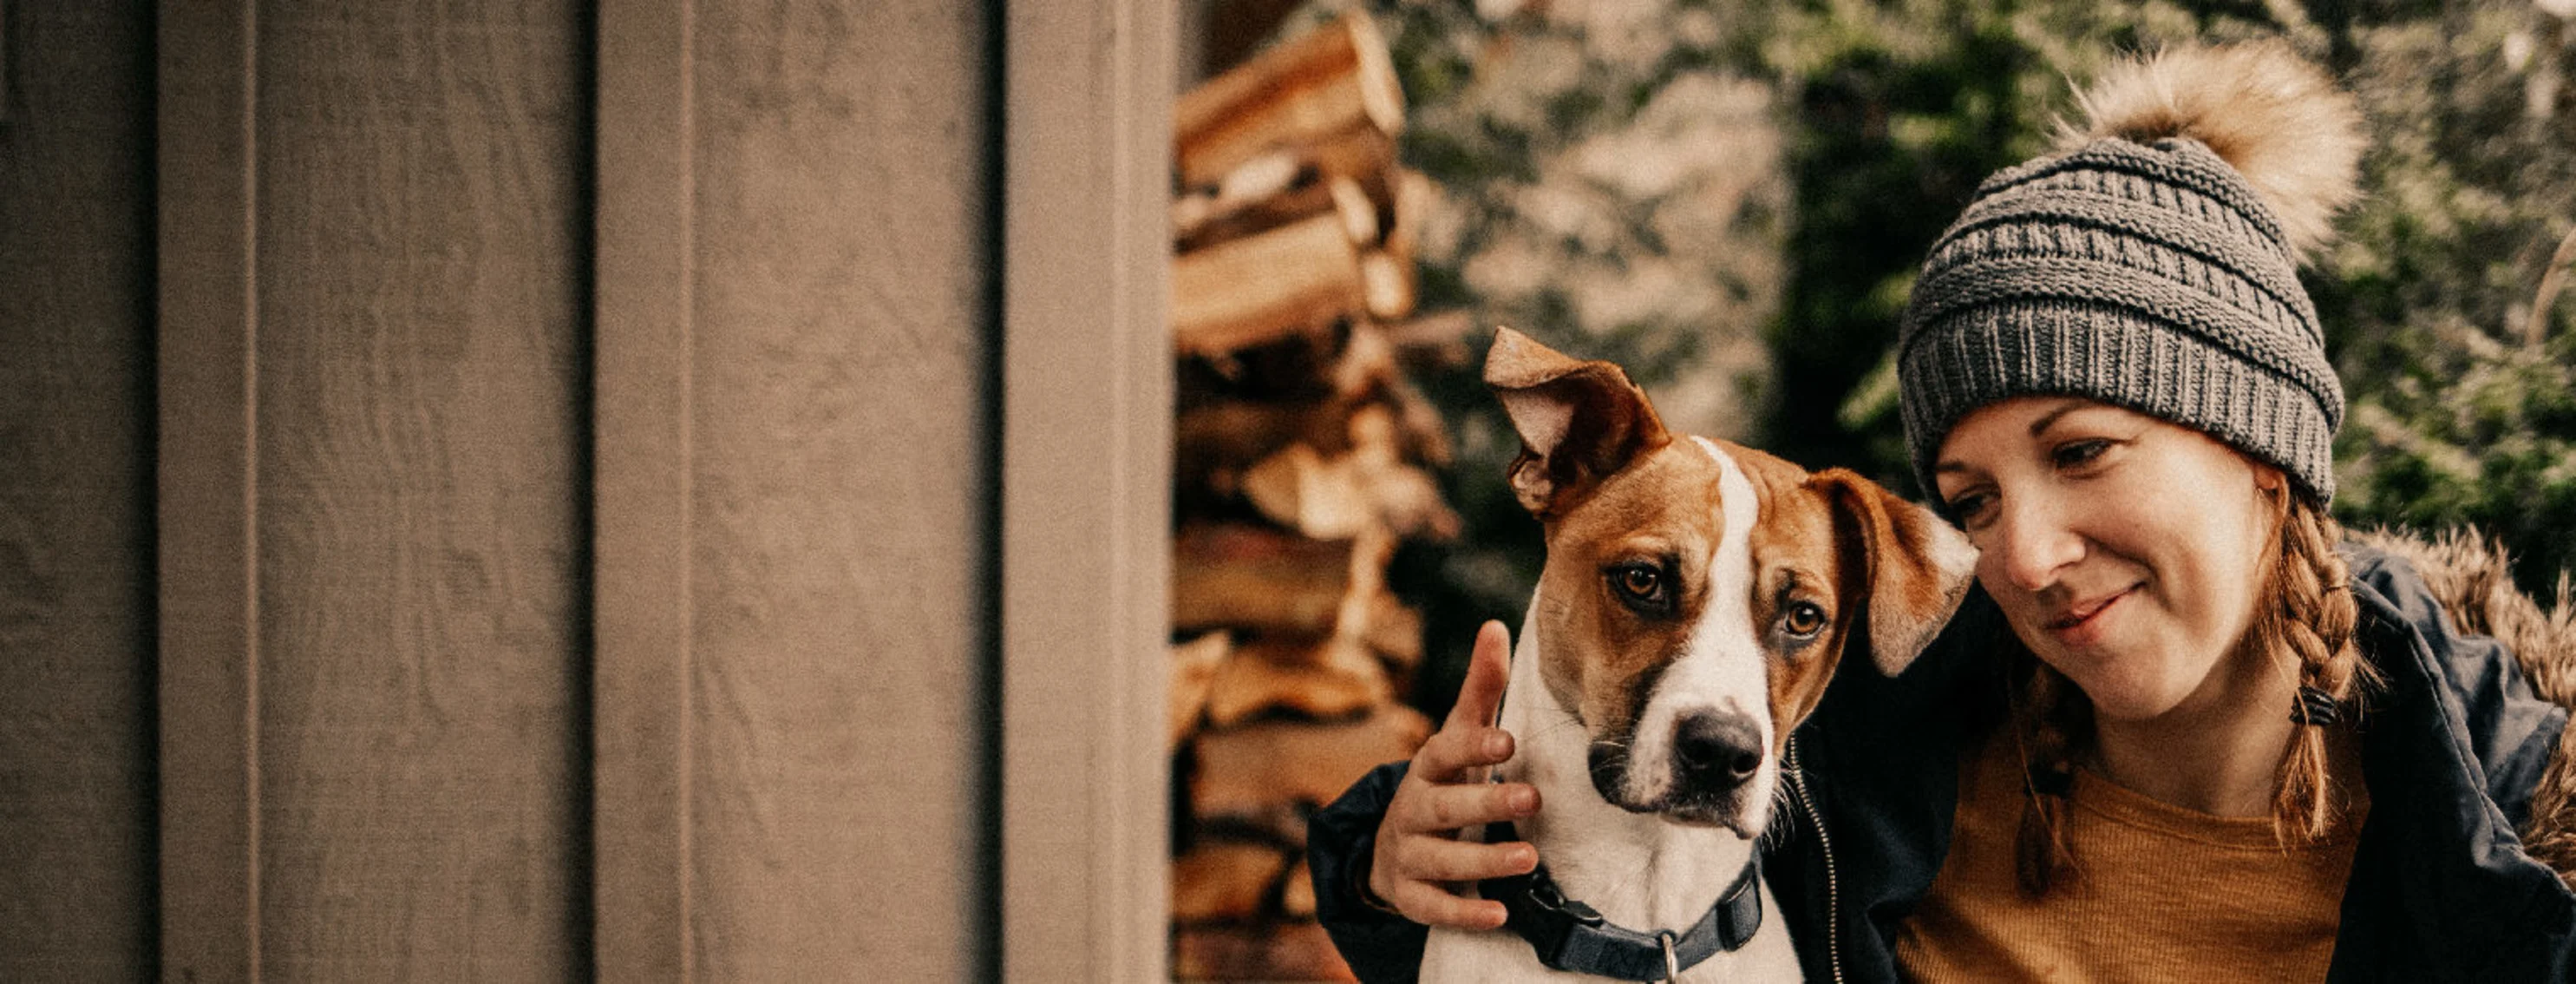 A dog snuggling with its owner outdoors next to a stack of firewood